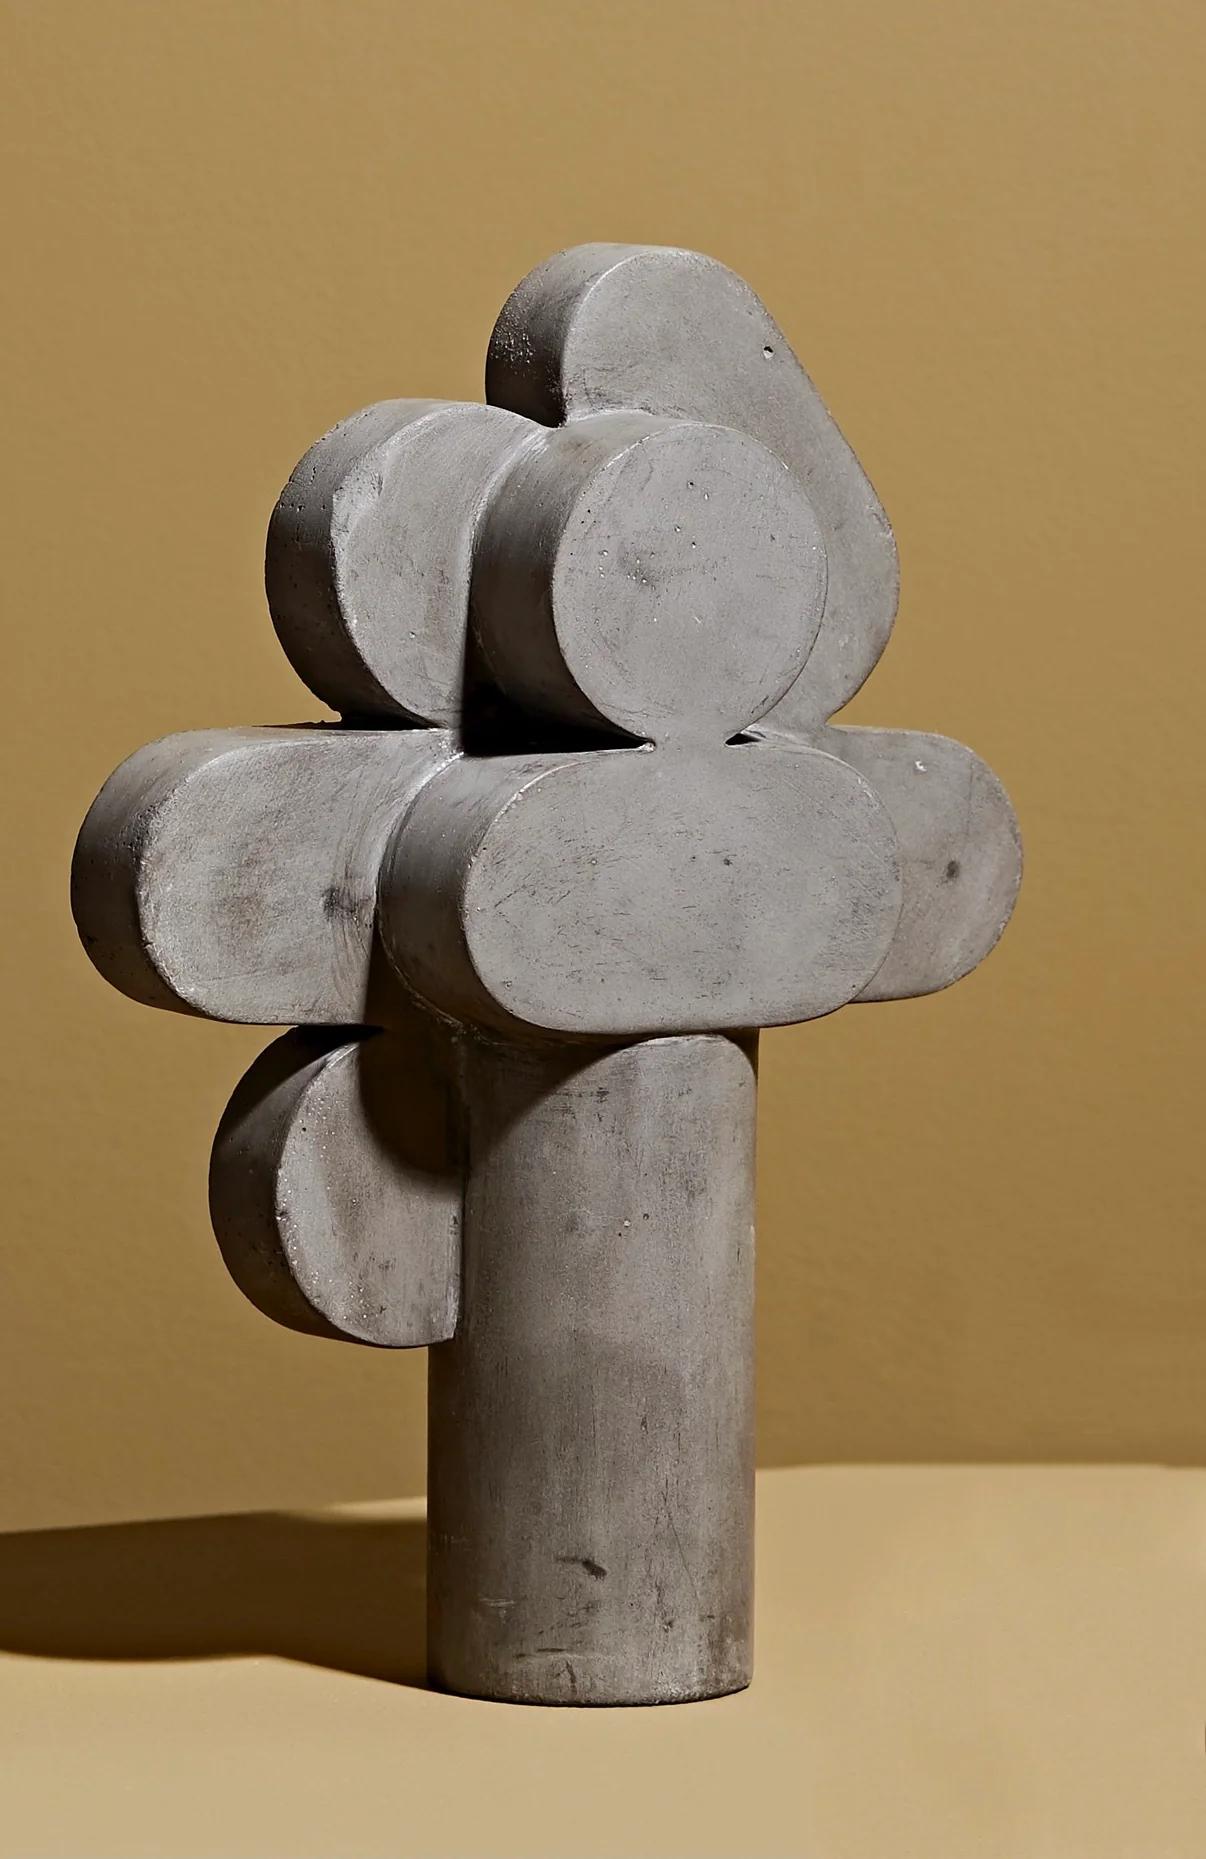 By Cast Editions

Designed By Vic Wright

Cast Editions is Vic Wrights latest series of sculptures. The shapes interact and connect with each other making adaptable collections. All the pieces in the whole series can be displayed and stacked in a